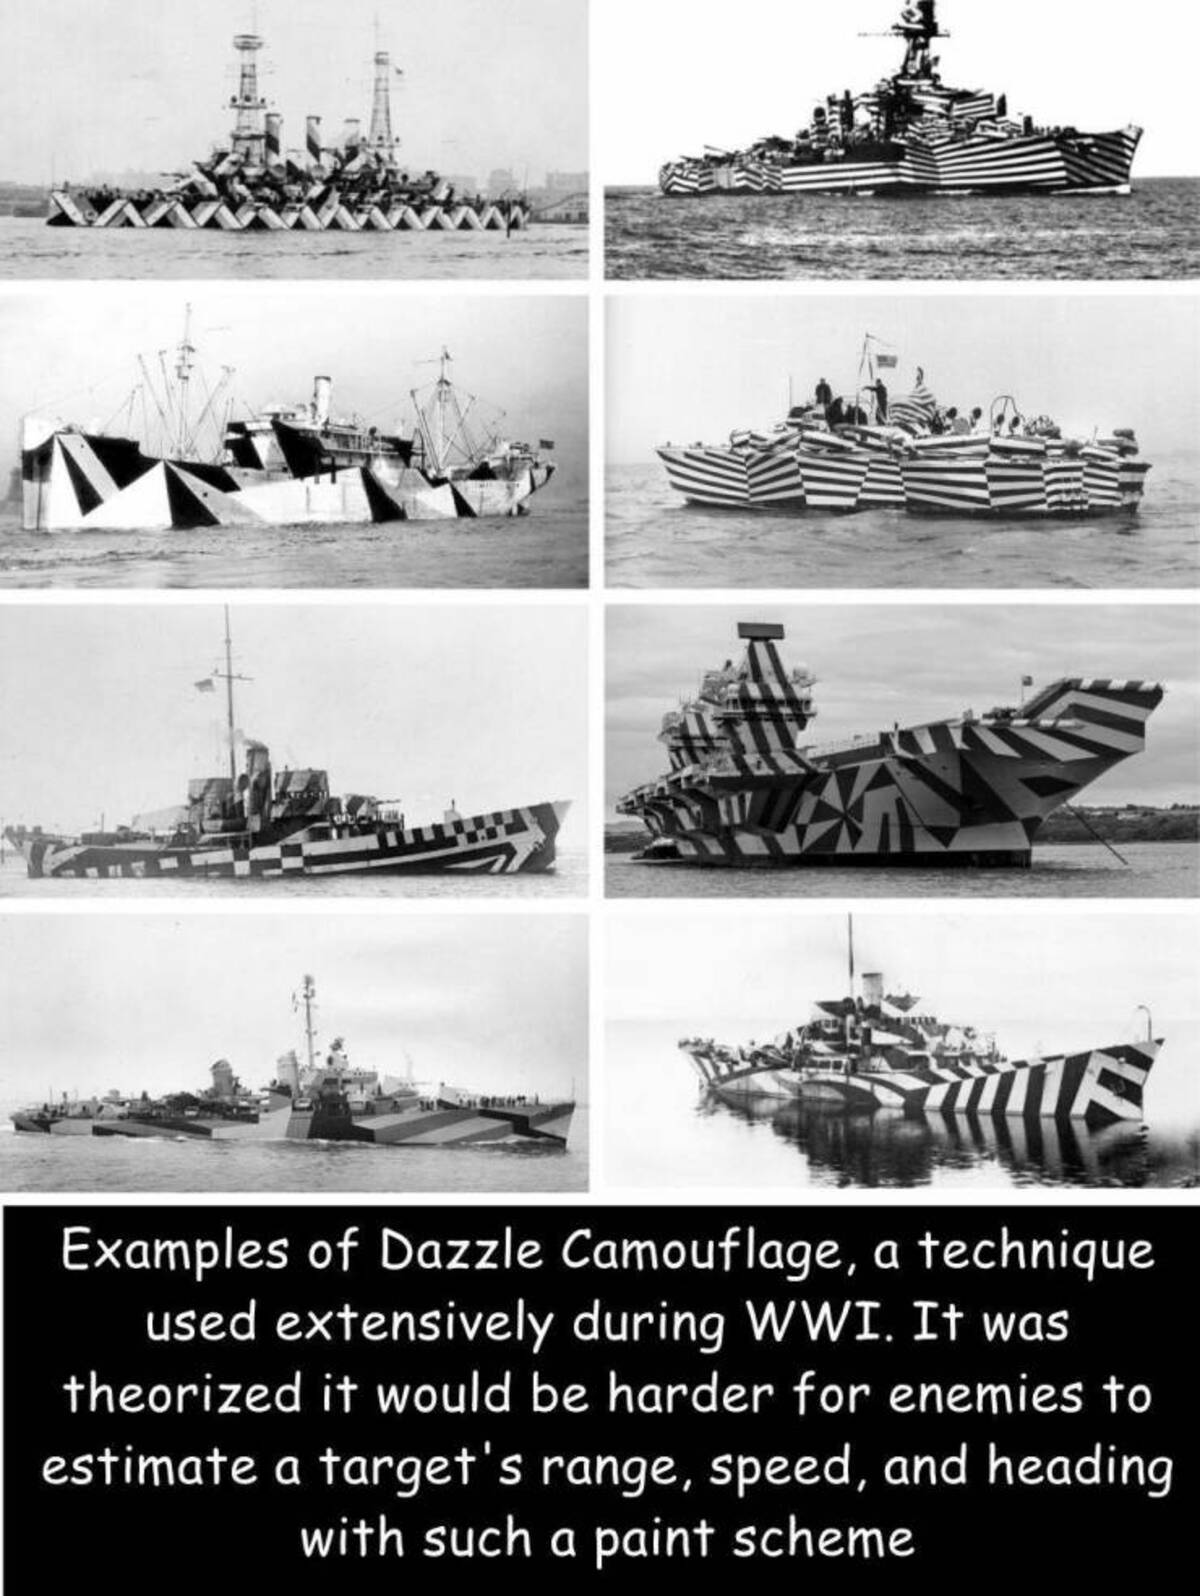 heavy cruiser - tits Examples of Dazzle Camouflage, a technique used extensively during Wwi. It was theorized it would be harder for enemies to estimate a target's range, speed, and heading with such a paint scheme